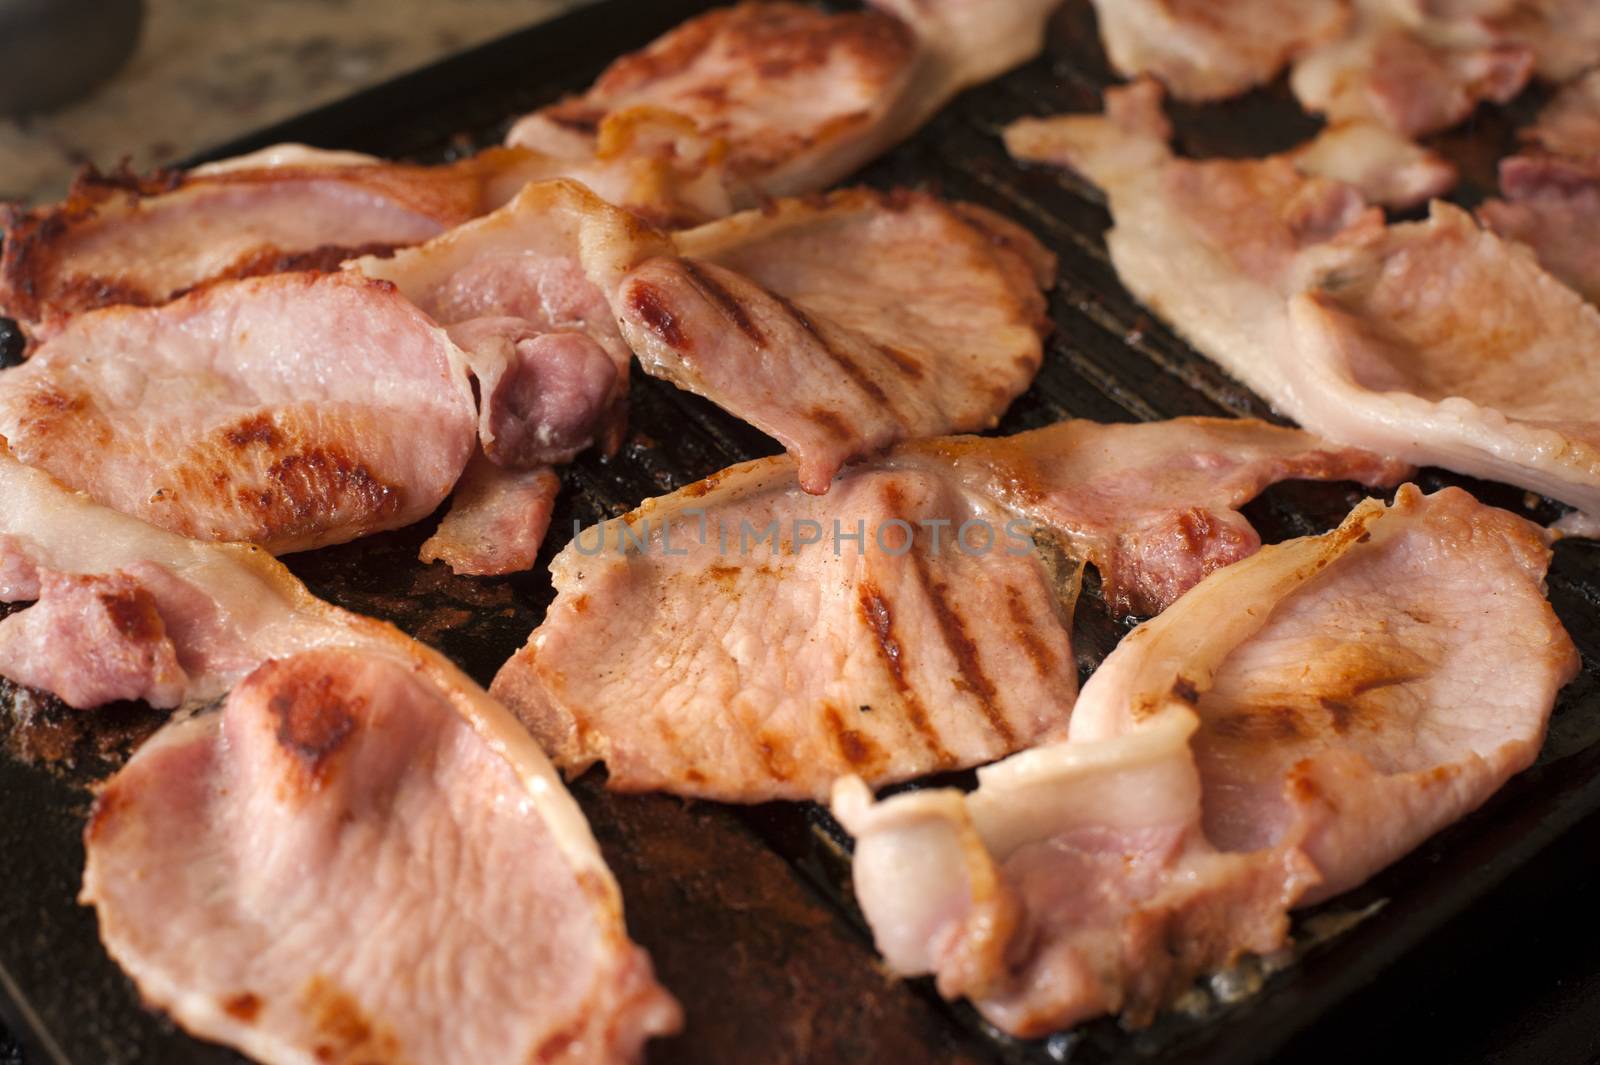 Cooking rashers of bacon for breakfast with a close up view of slices sizzling in a frying pan